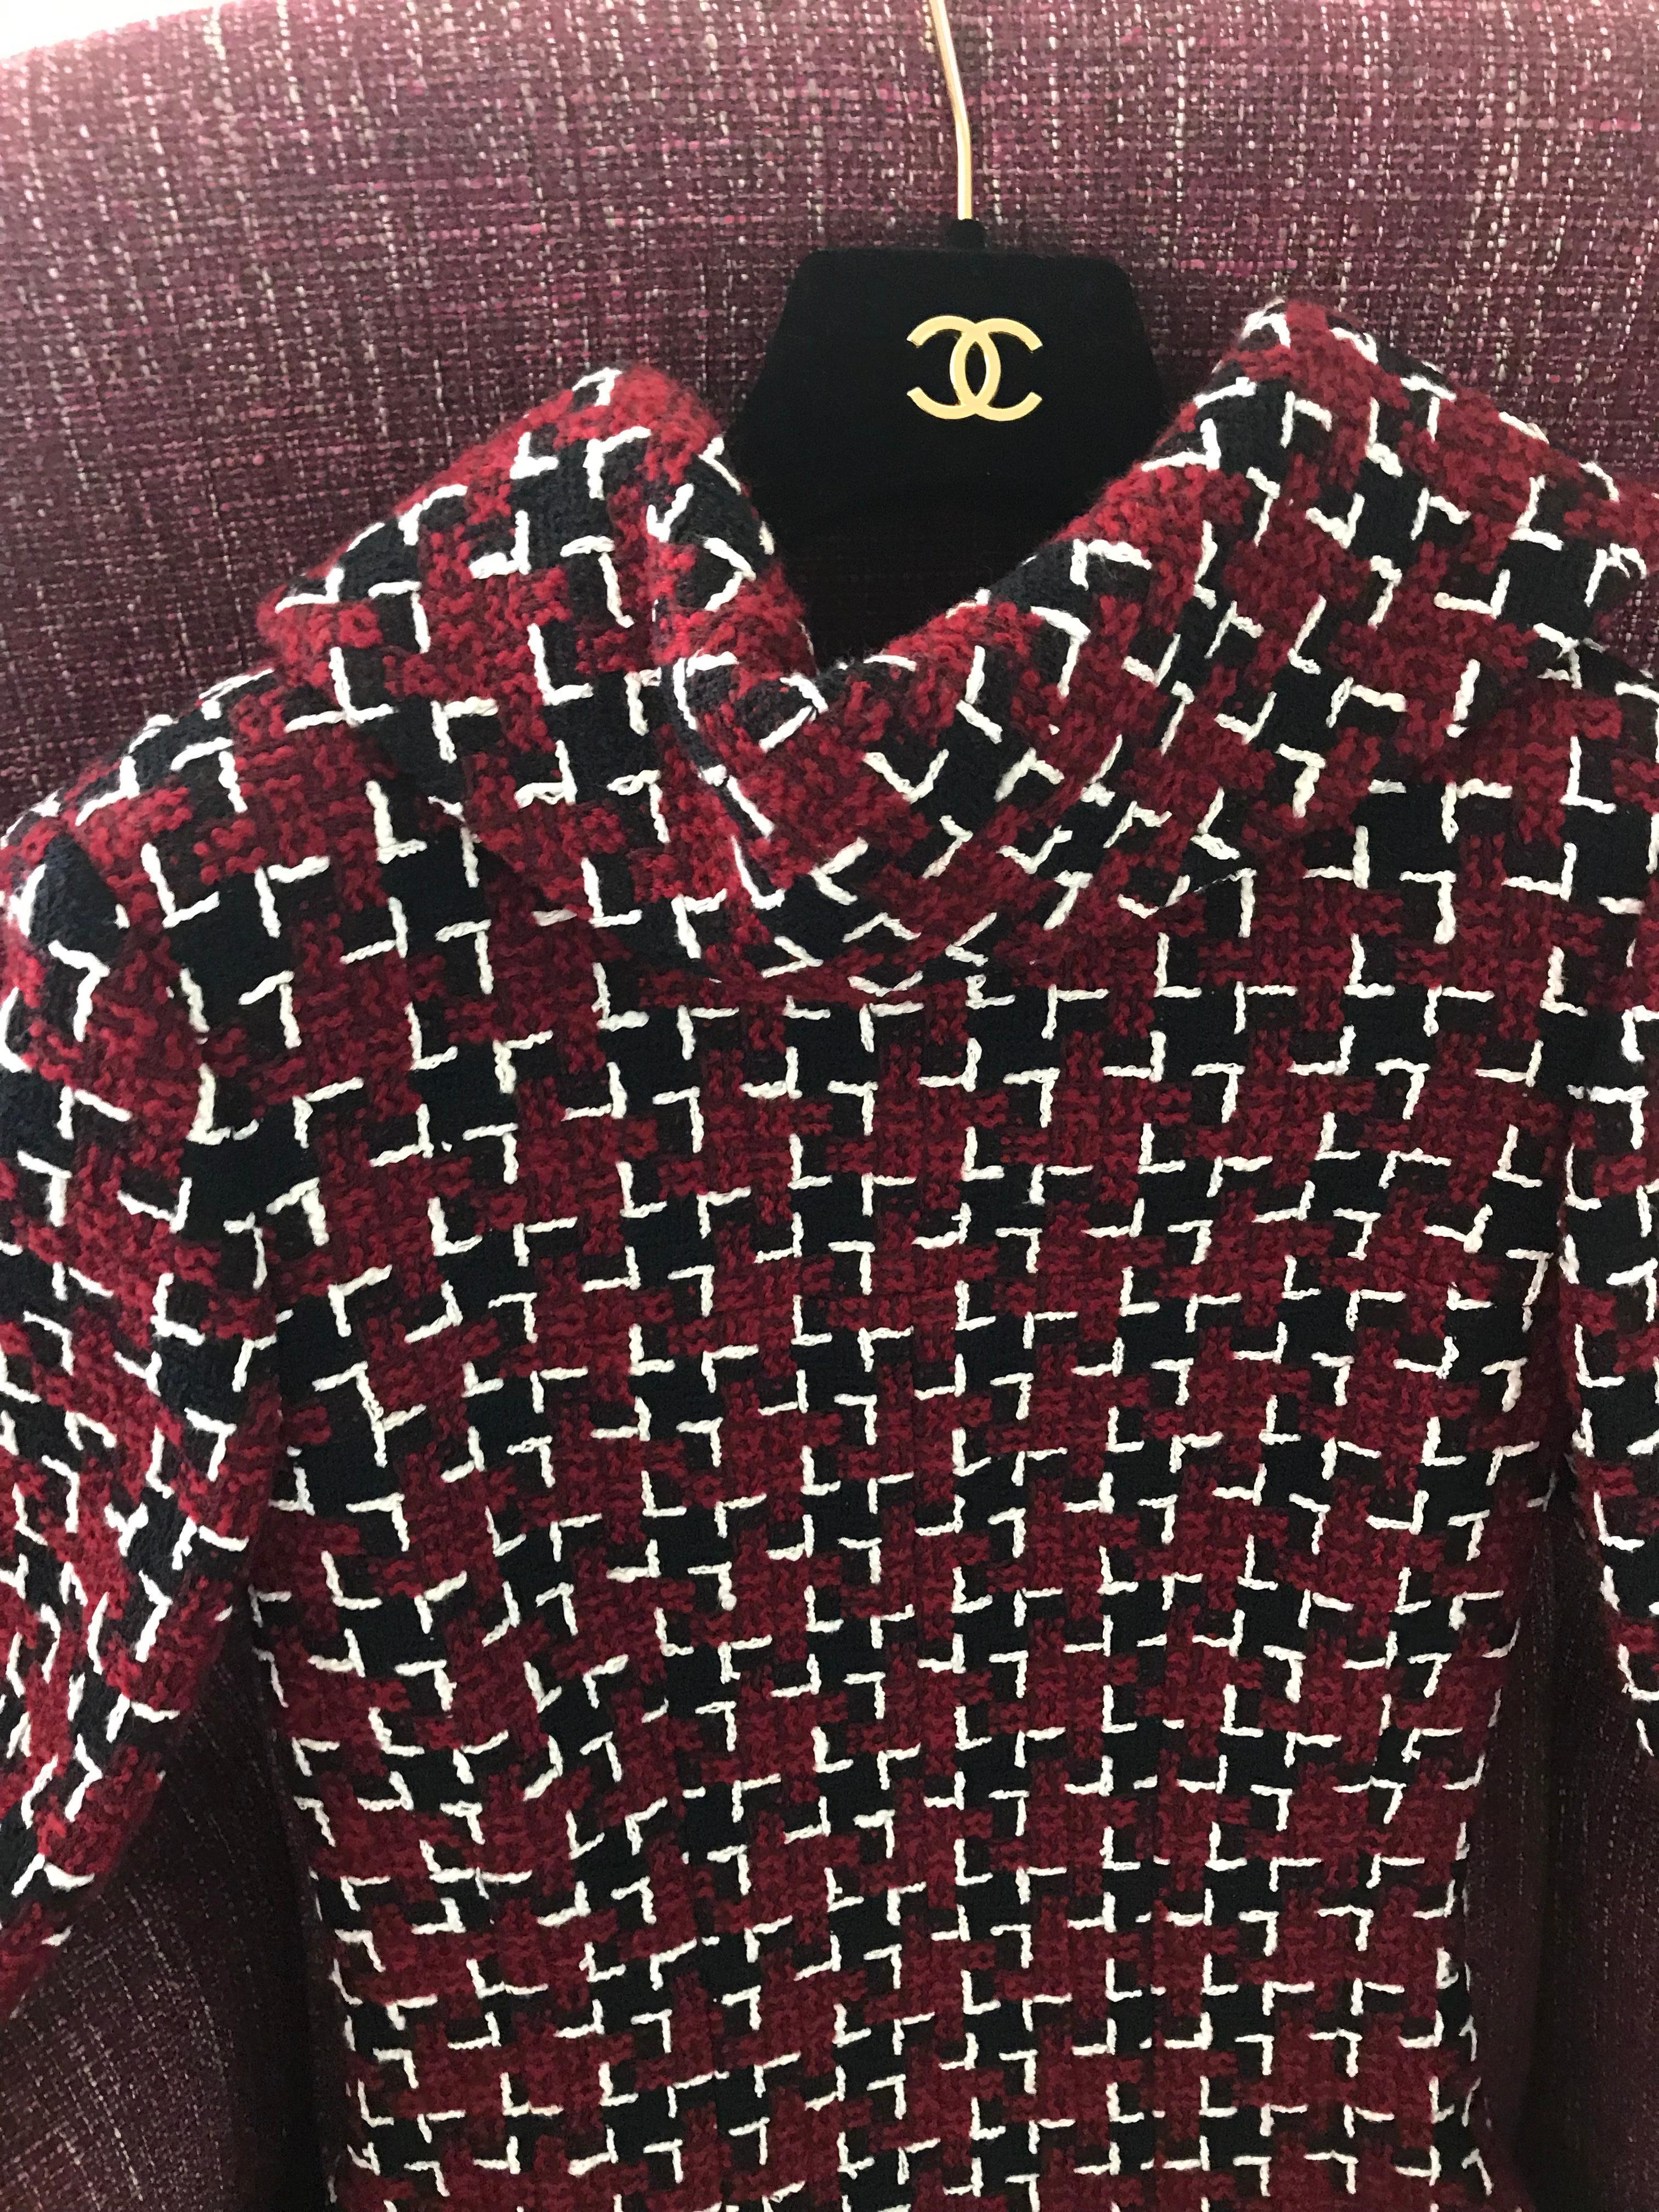 Chanel Cocktail Tweed Dress in Burgundy, Black and White New with tag 1